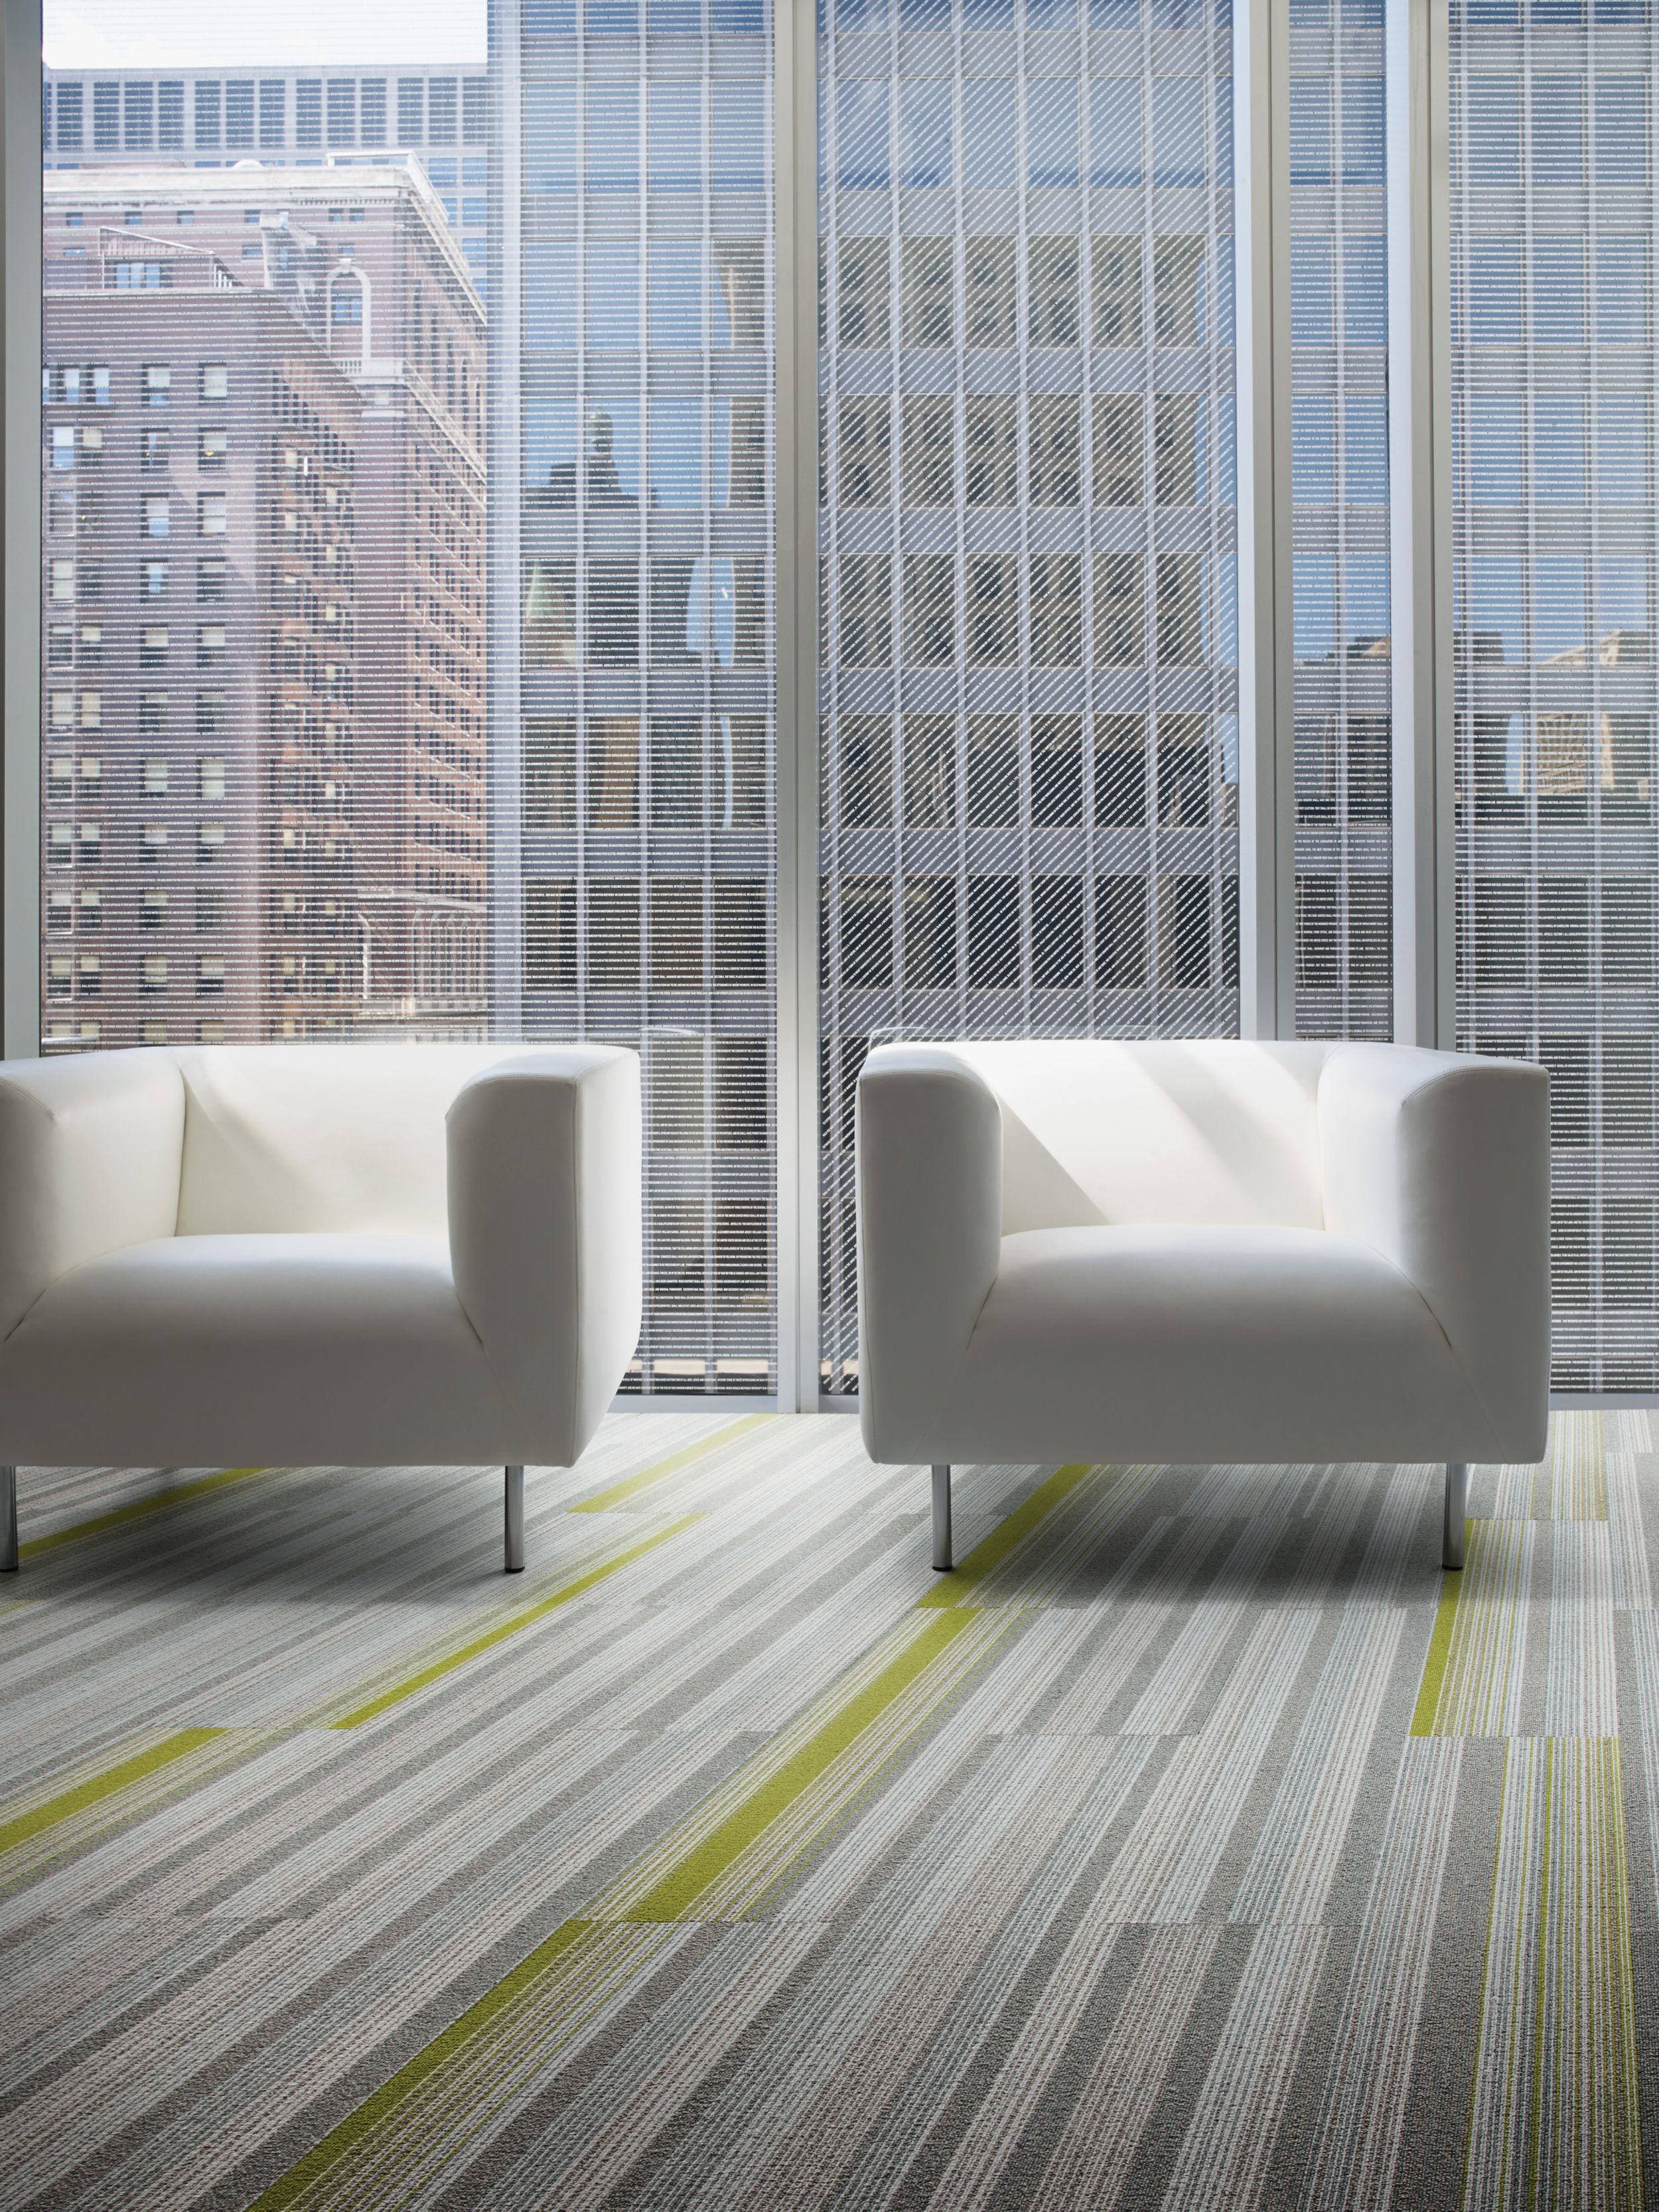 Interface SS217 and SS218 plank carpet tile in seating are with two chairs and glass walls imagen número 7